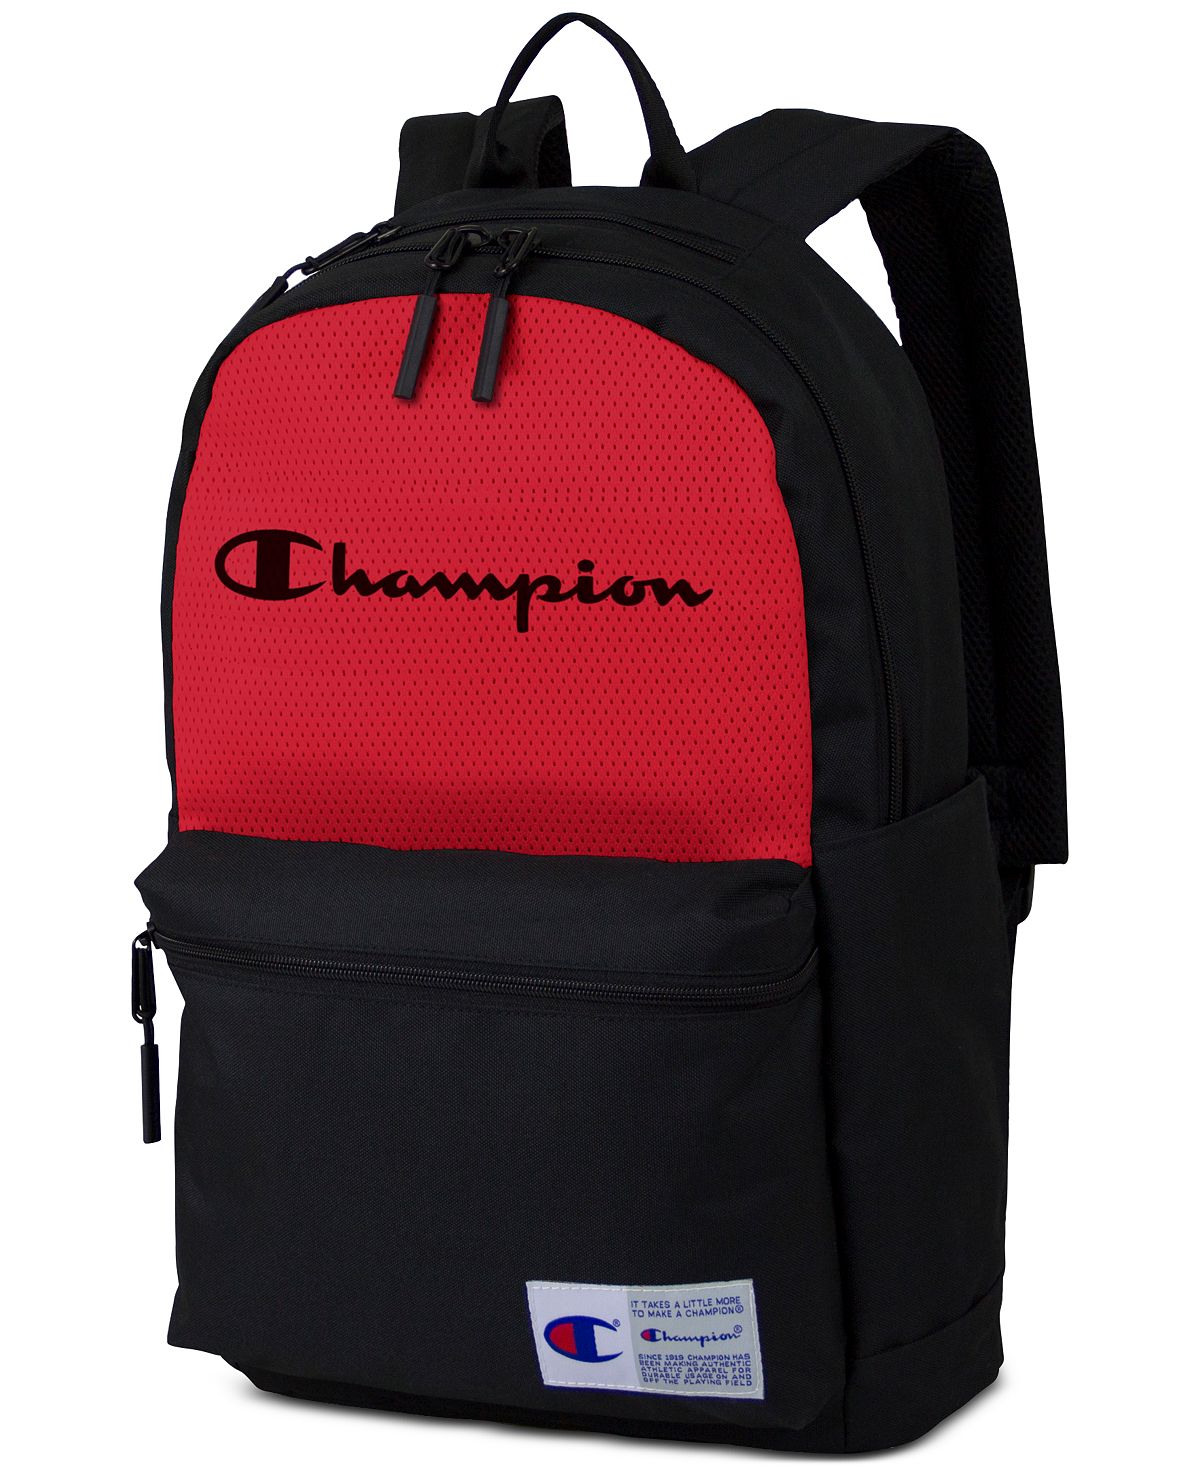 Champion Colorblocked Backpack Black/red